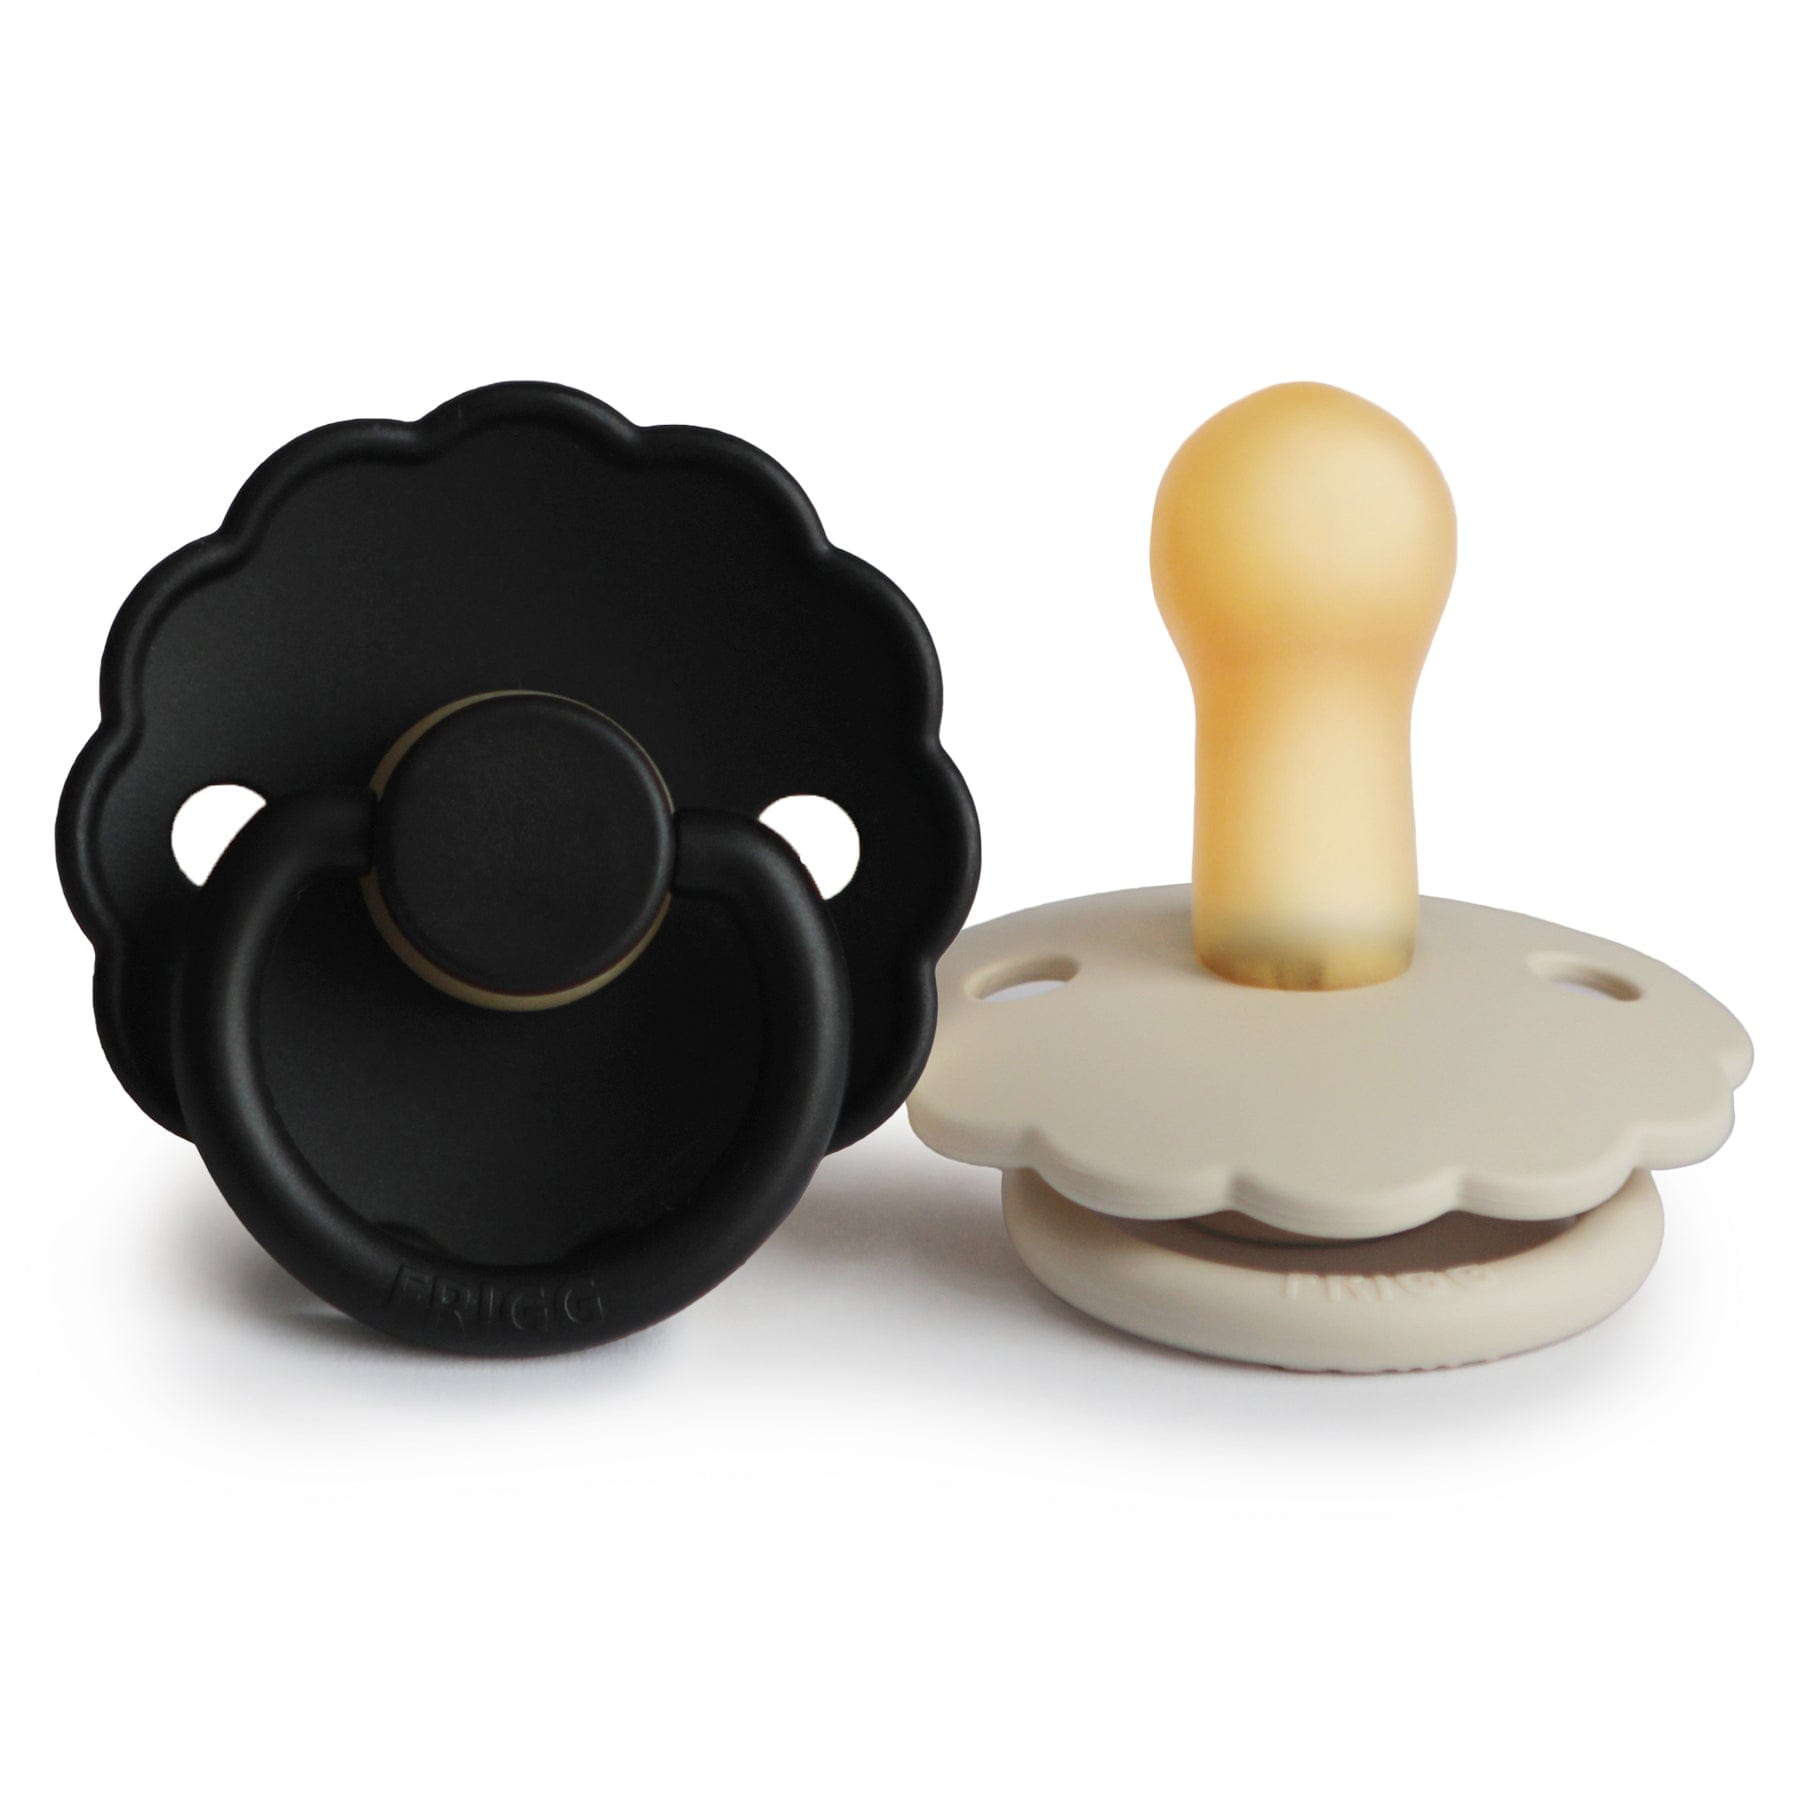 Mushie Soother FRIGG Daisy Natural Rubber Baby Pacifier (Jet Black/Cream) 2-Pack